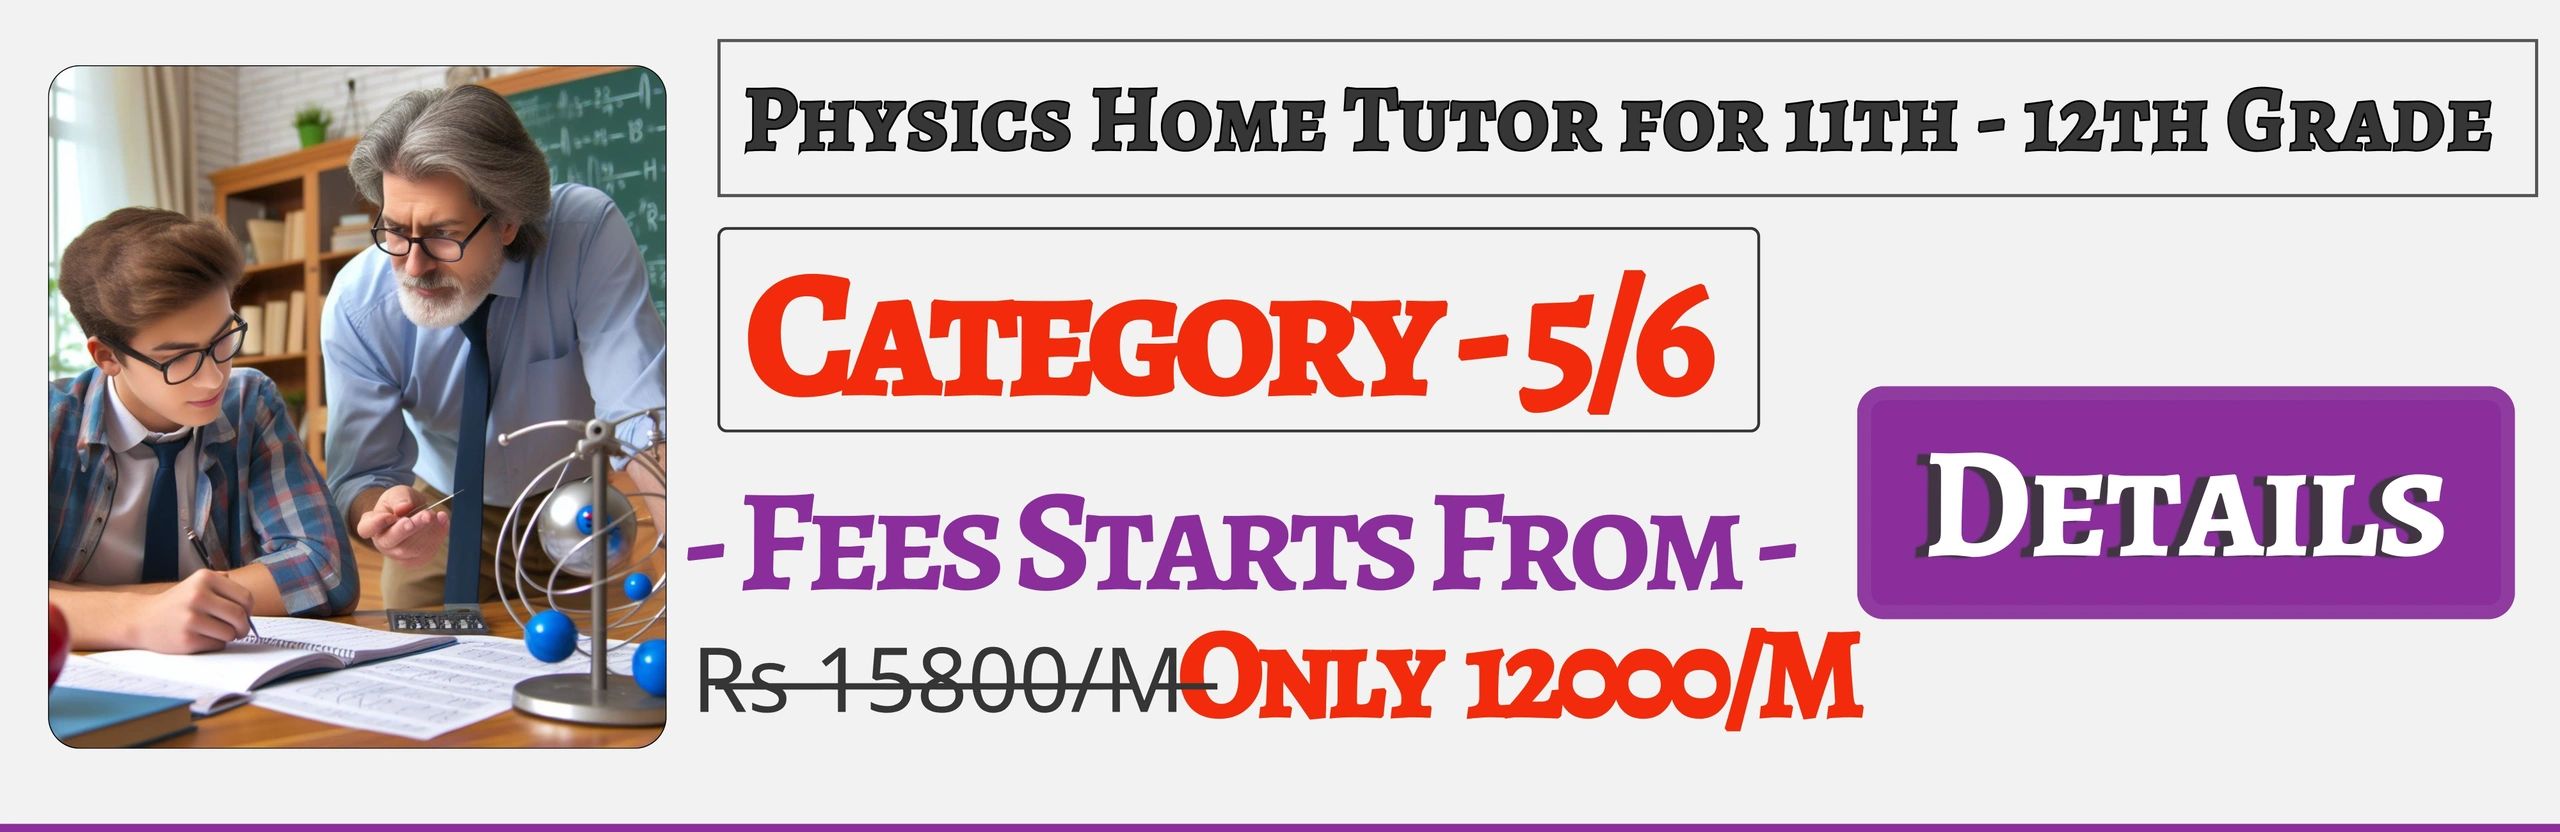 Book Best Nearby Physics Home Tuition Tutors For 11th & 12th In Jaipur , Fees Only 12000/M